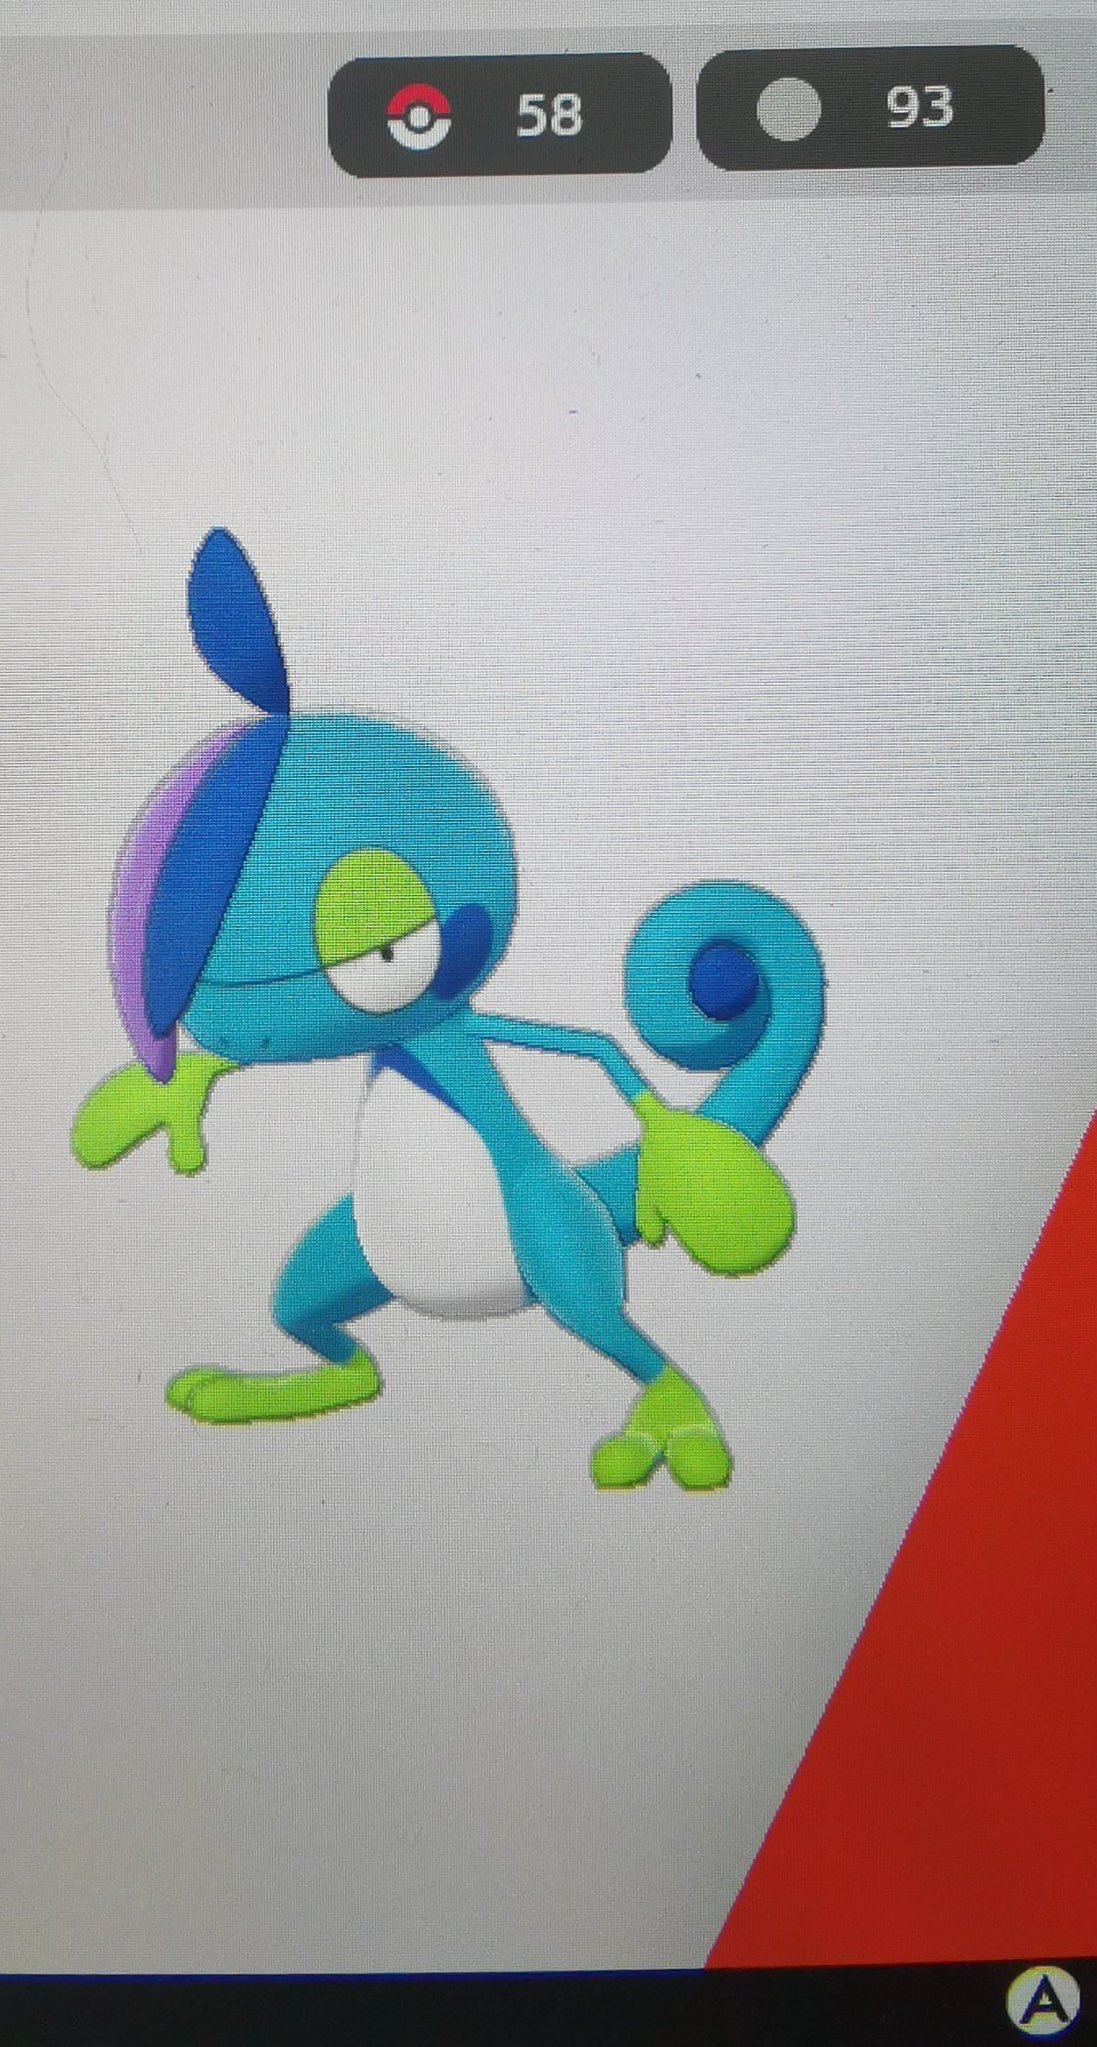 How to Find and Evolve Sobble in Pokémon Sword and Shield